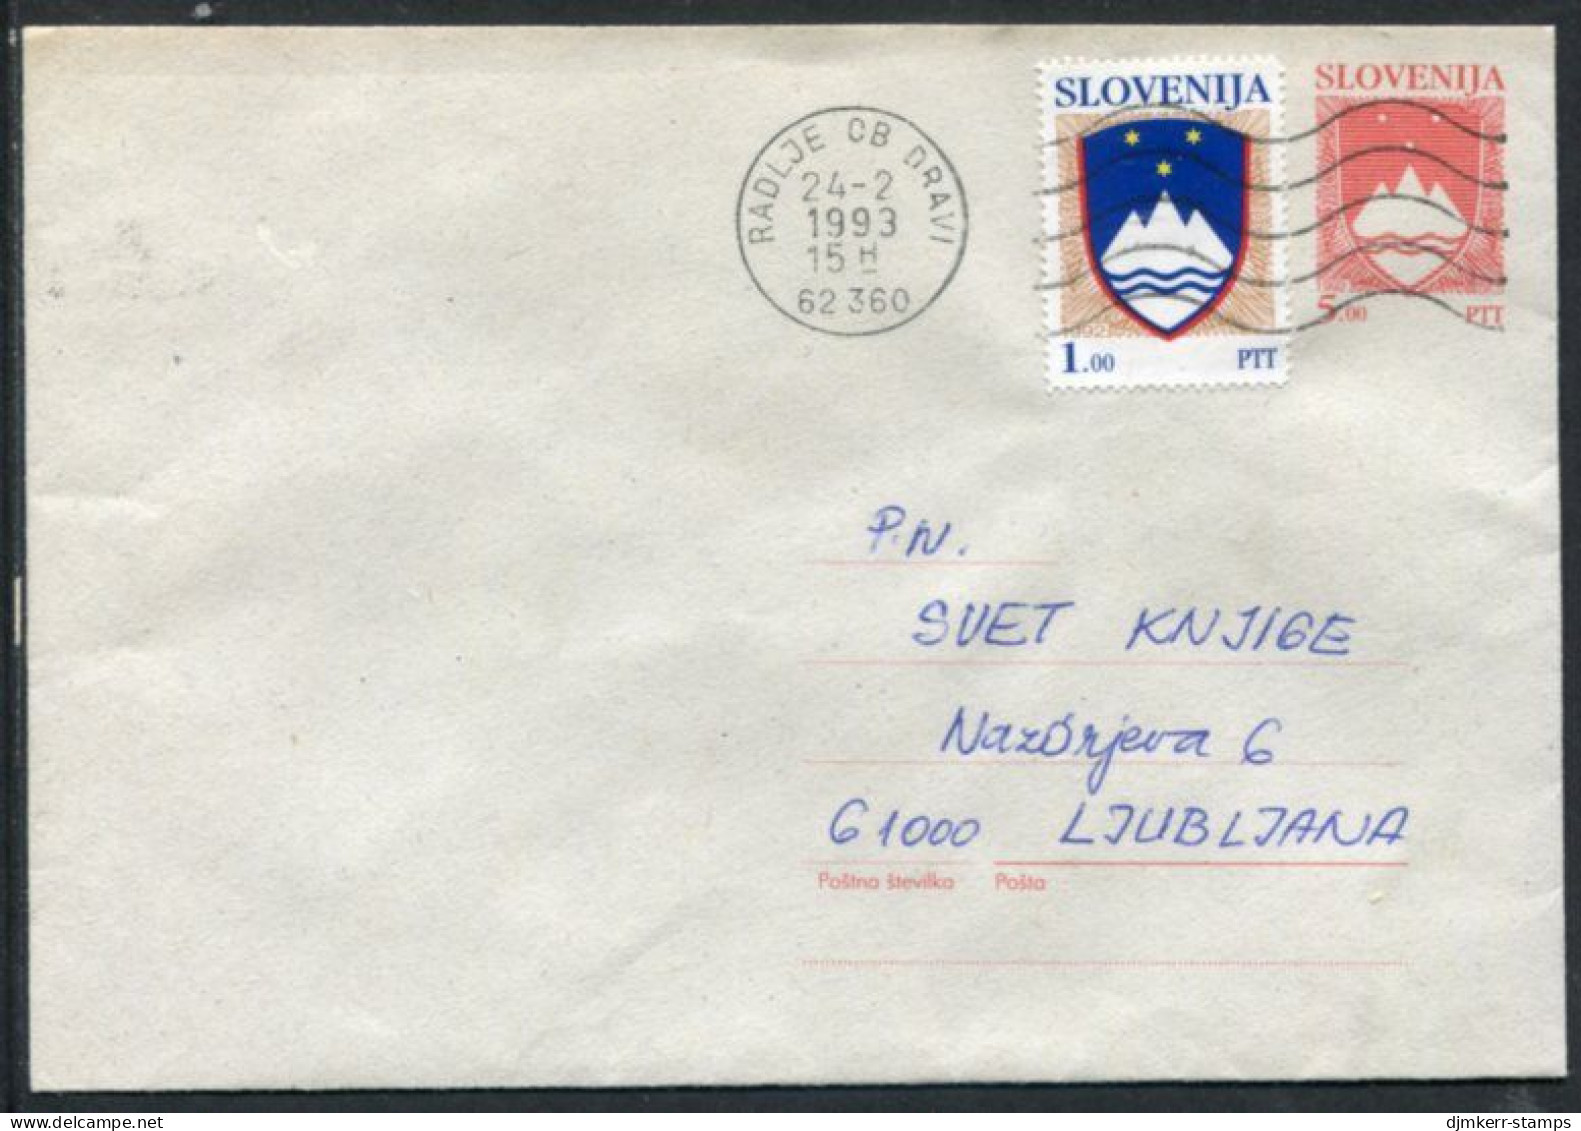 SLOVENIA 1992 5.00 T.  Postal Stationery Envelope On Grey Paper Used With Added 1 T. Stamp.  Michel U1b - Slovenia